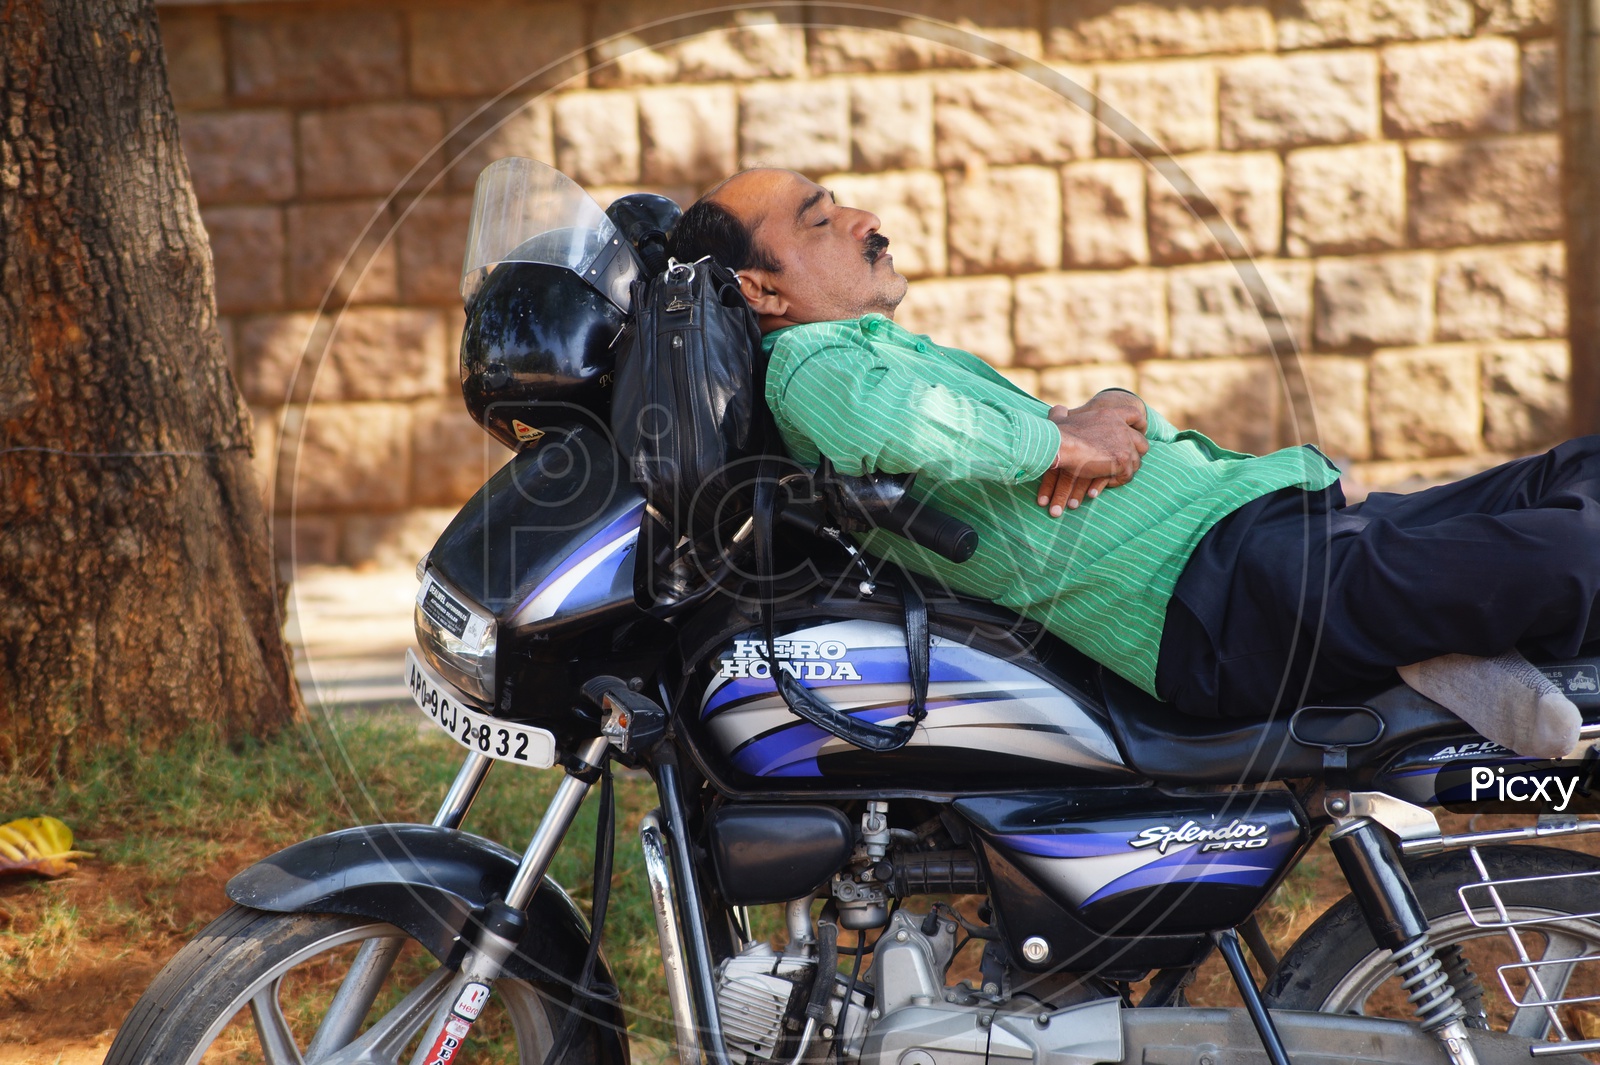 Man resting on Motorcycle